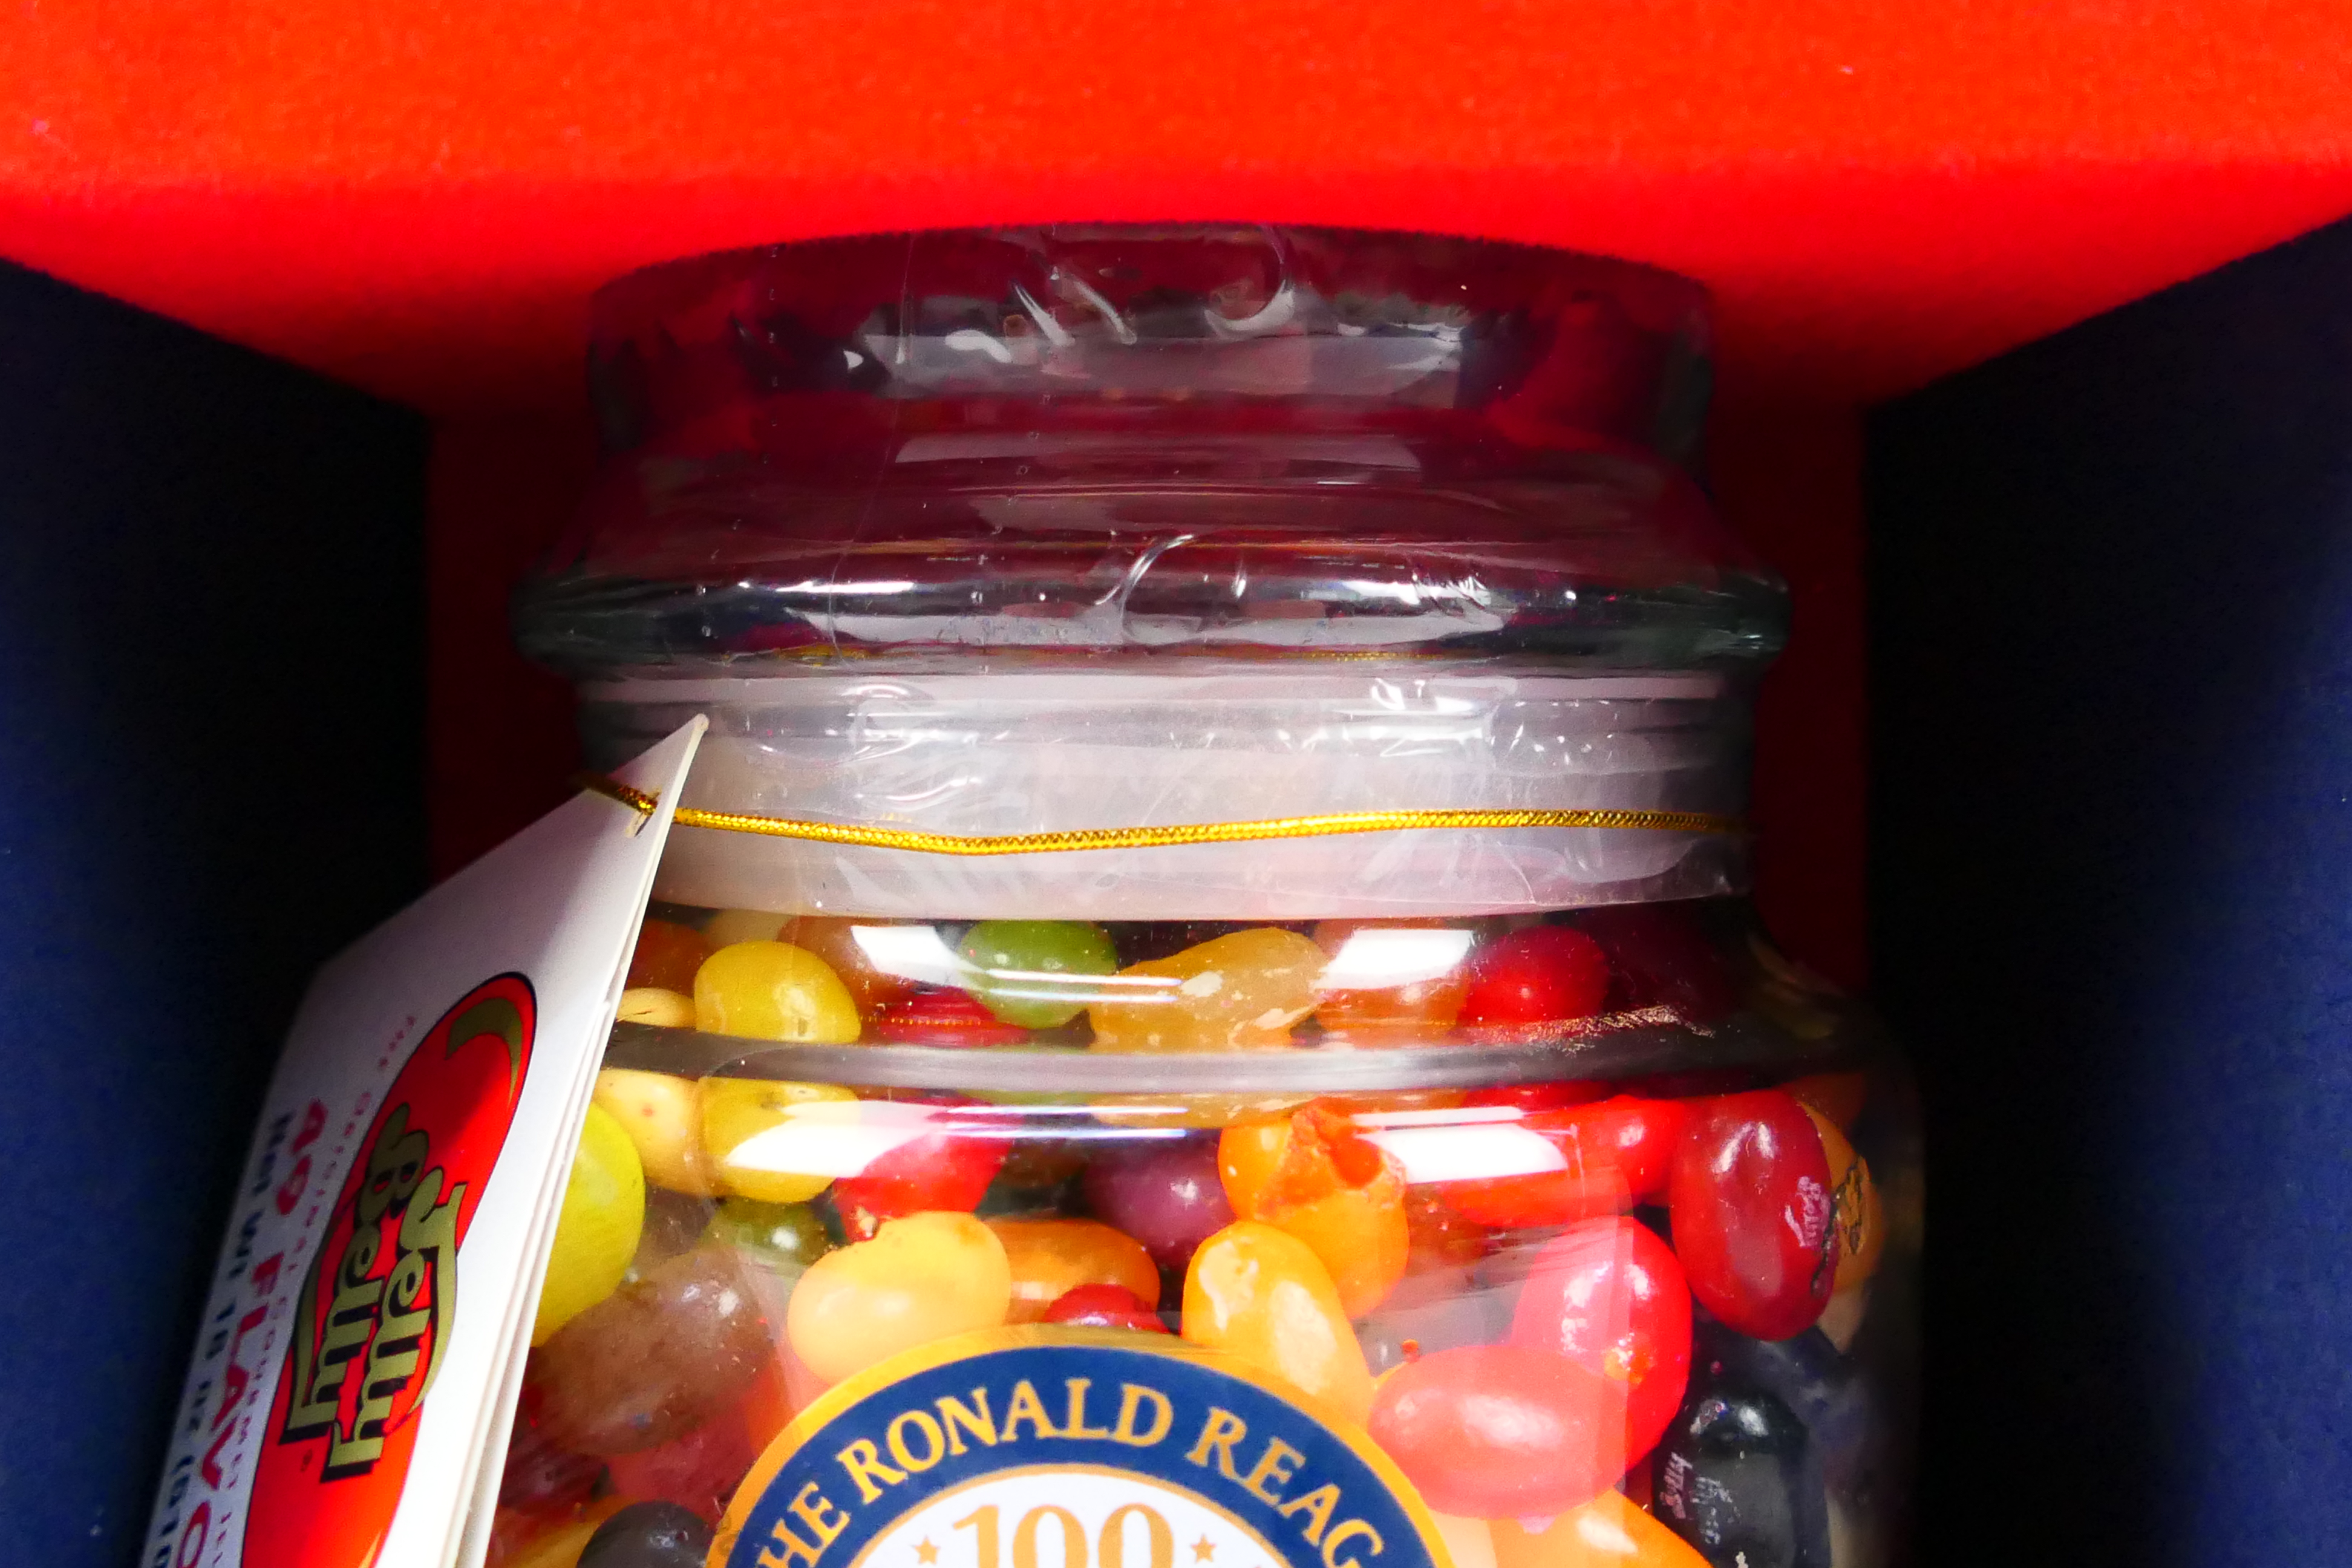 Ronald Reagan - An unopened and boxed jar of Jelly Belly jelly beans produced for The Ronald Reagan - Image 4 of 8